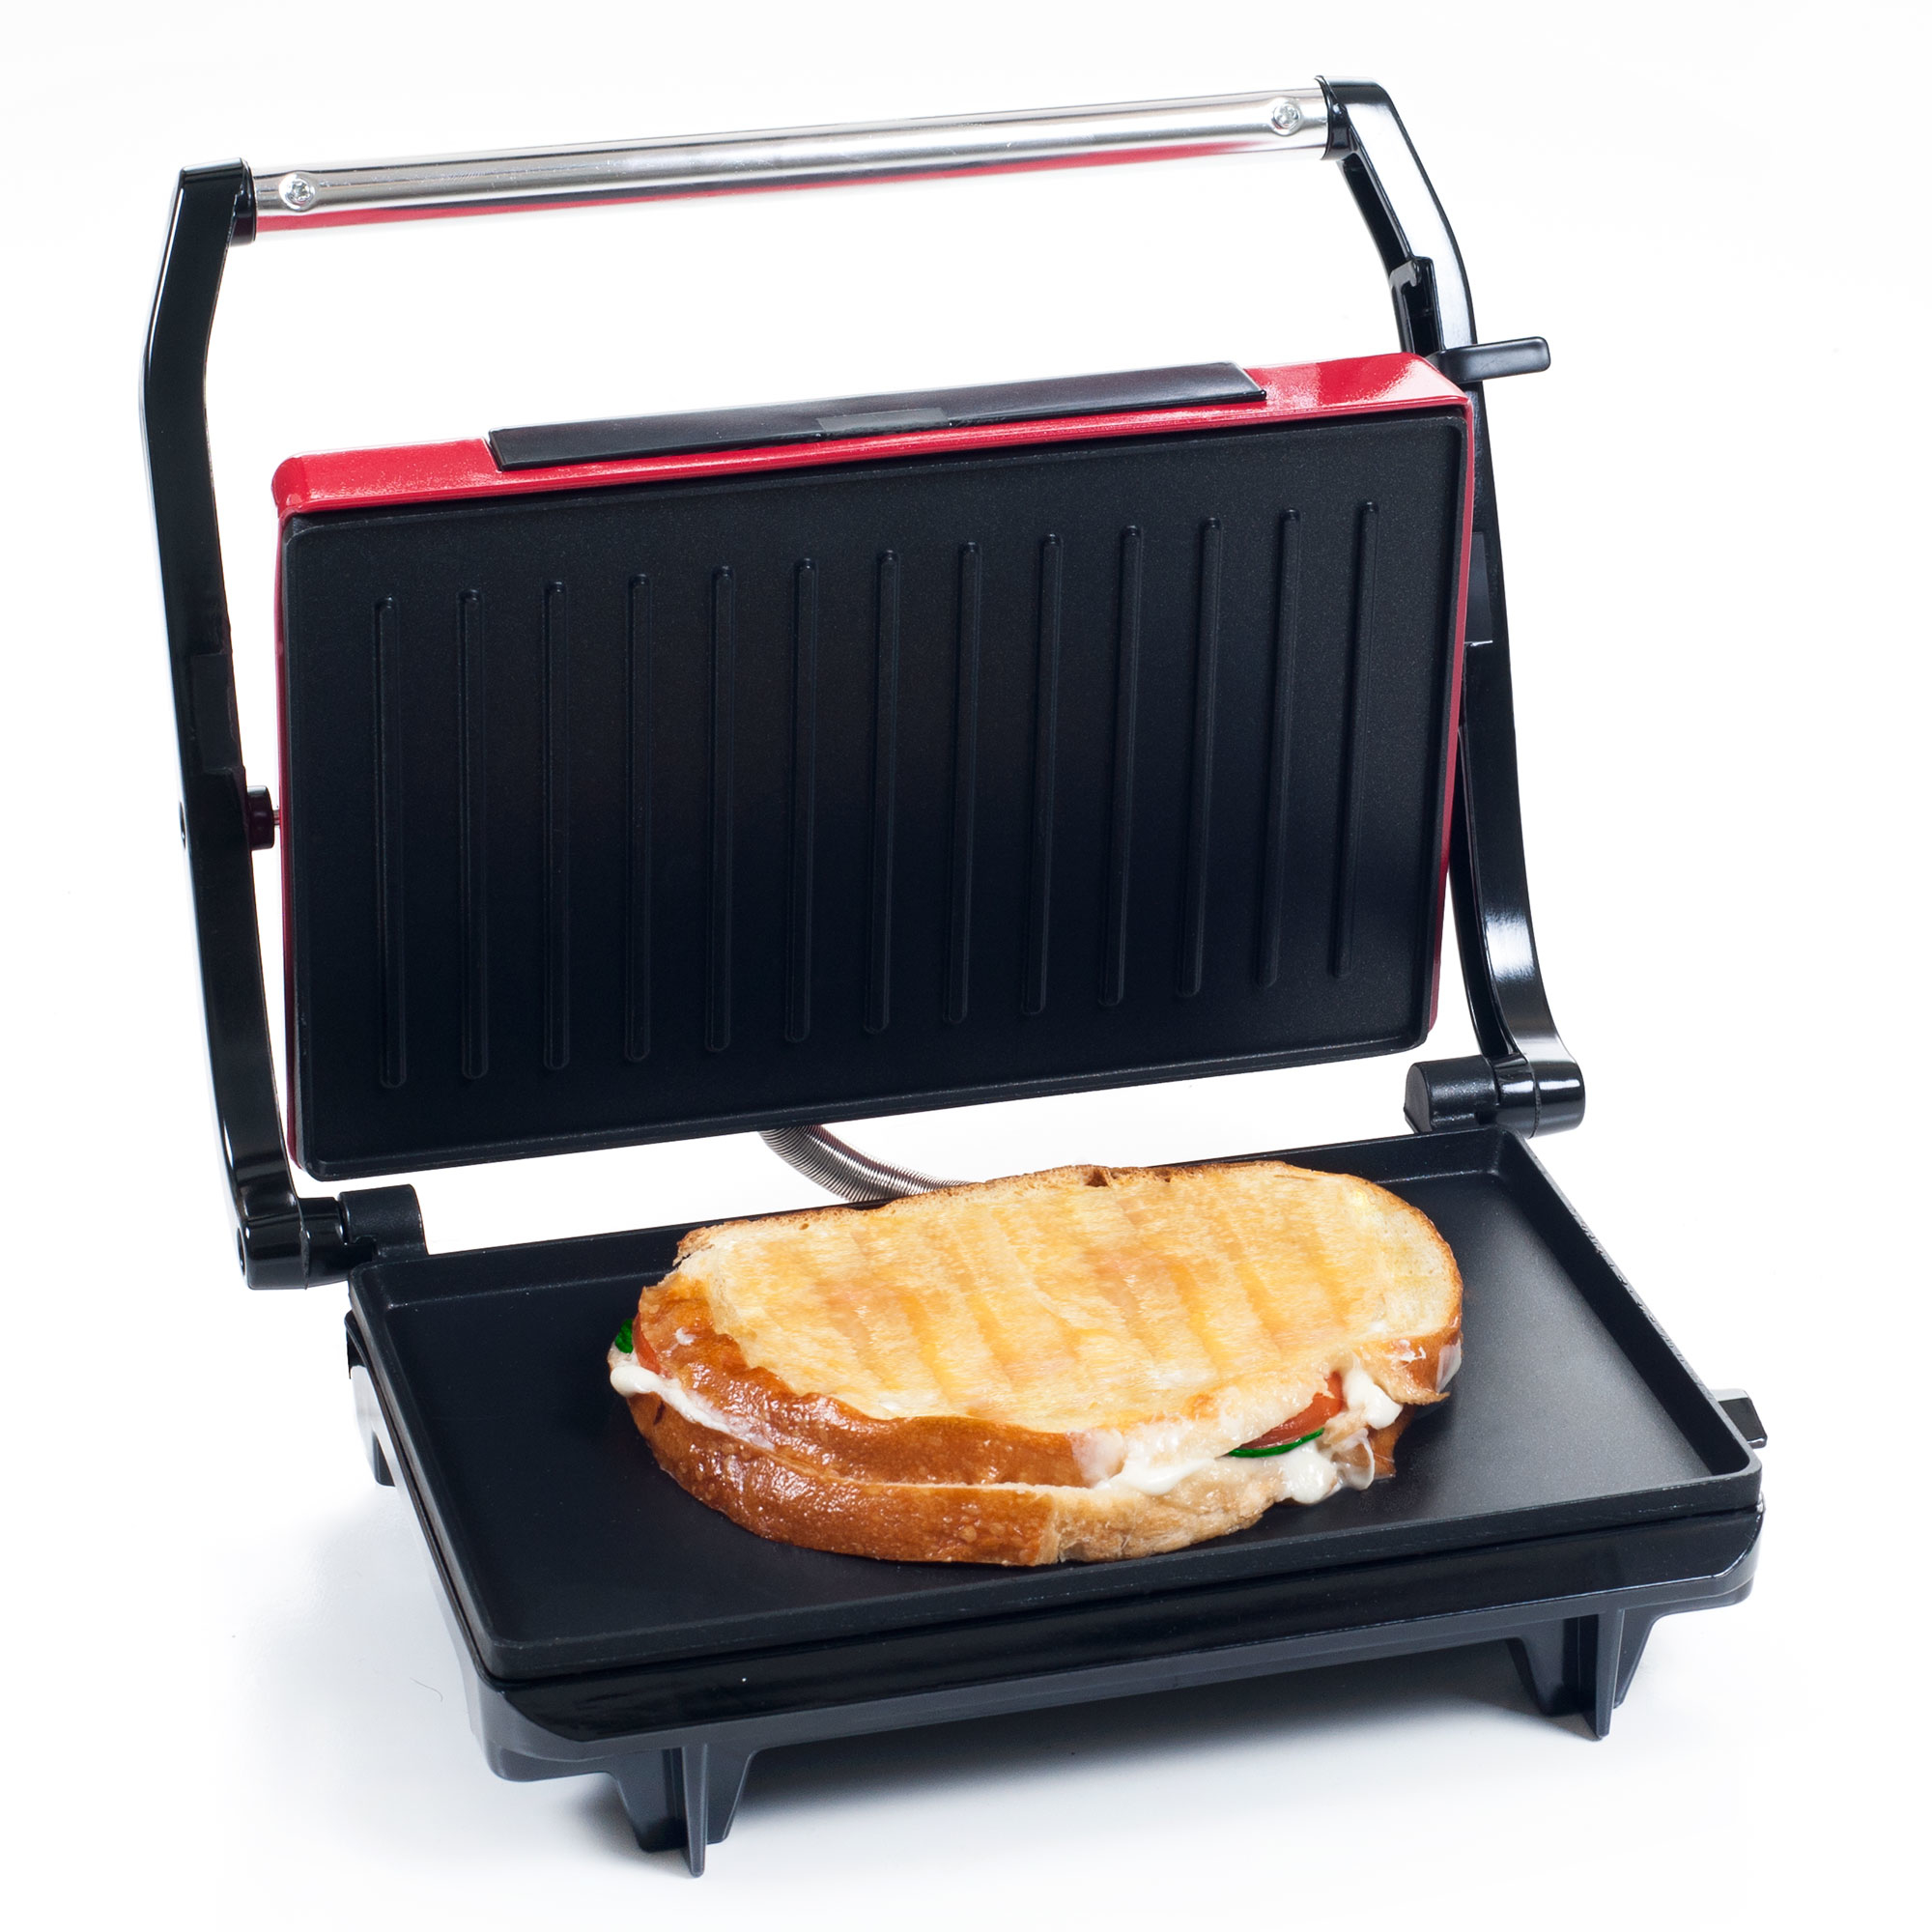 Chef Buddy Non-Stick Grill and Panini Press Gourmet Sandwich Maker Grill Meats Grease Channel for Meats